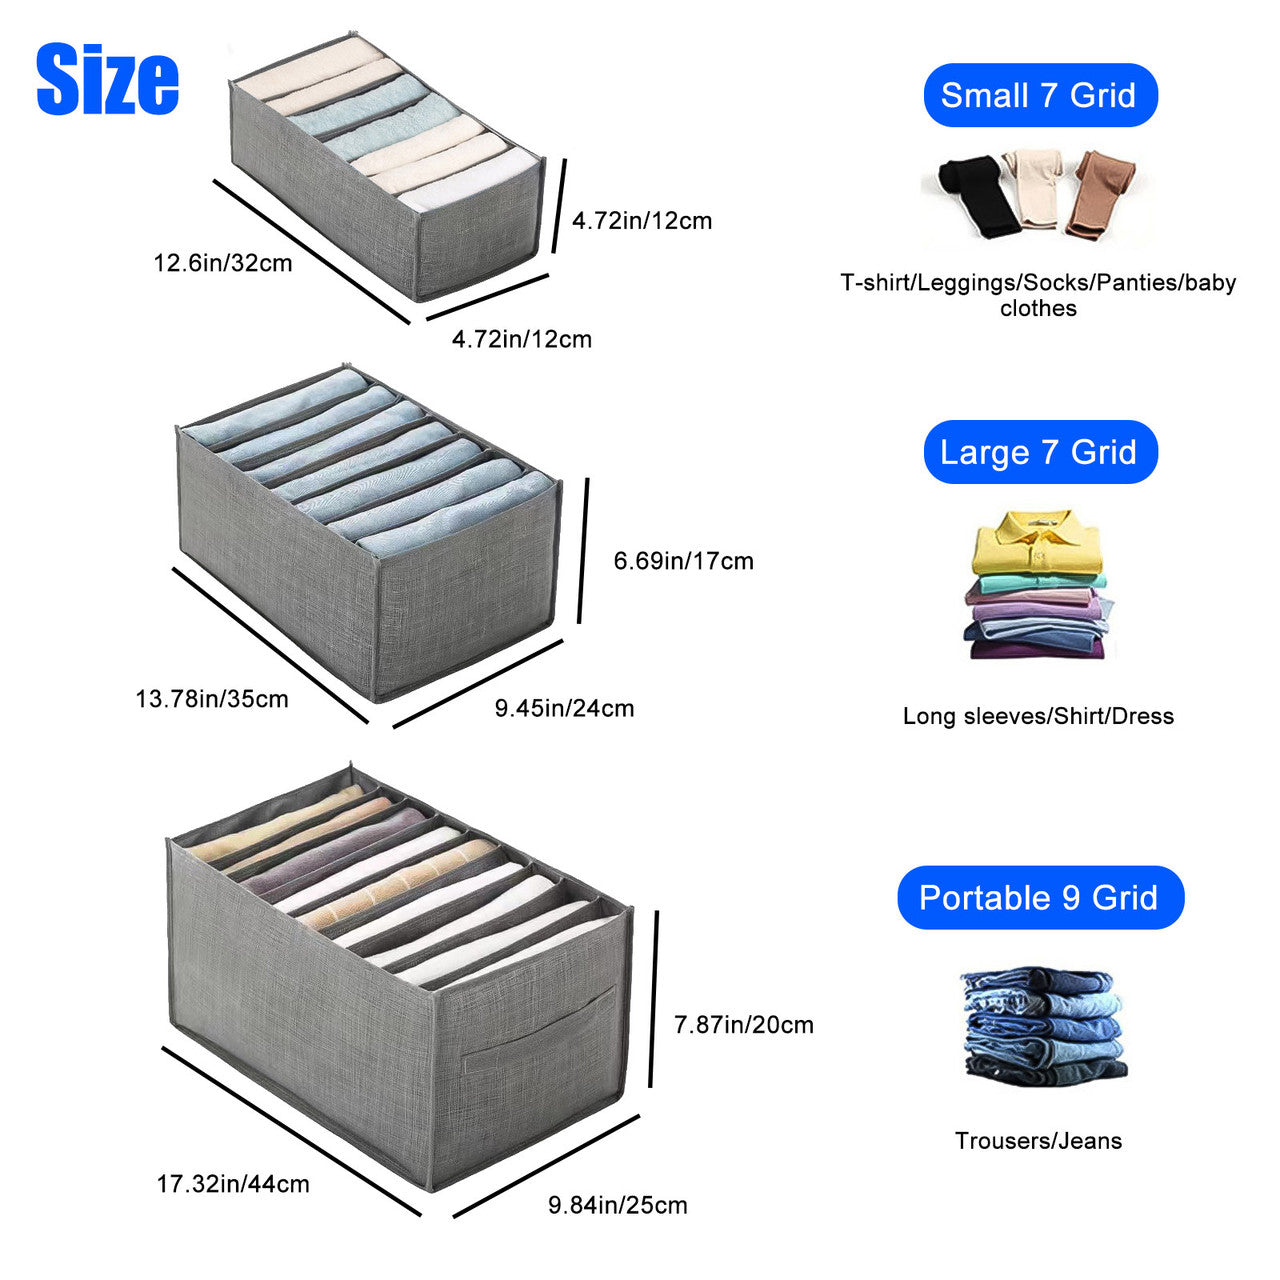 7 Compartment Clothes Storage Organizer - 7 Grids Drawer Organizer Foldable Visible Jeans Storage Compartment Closet Storage Space (Gray)